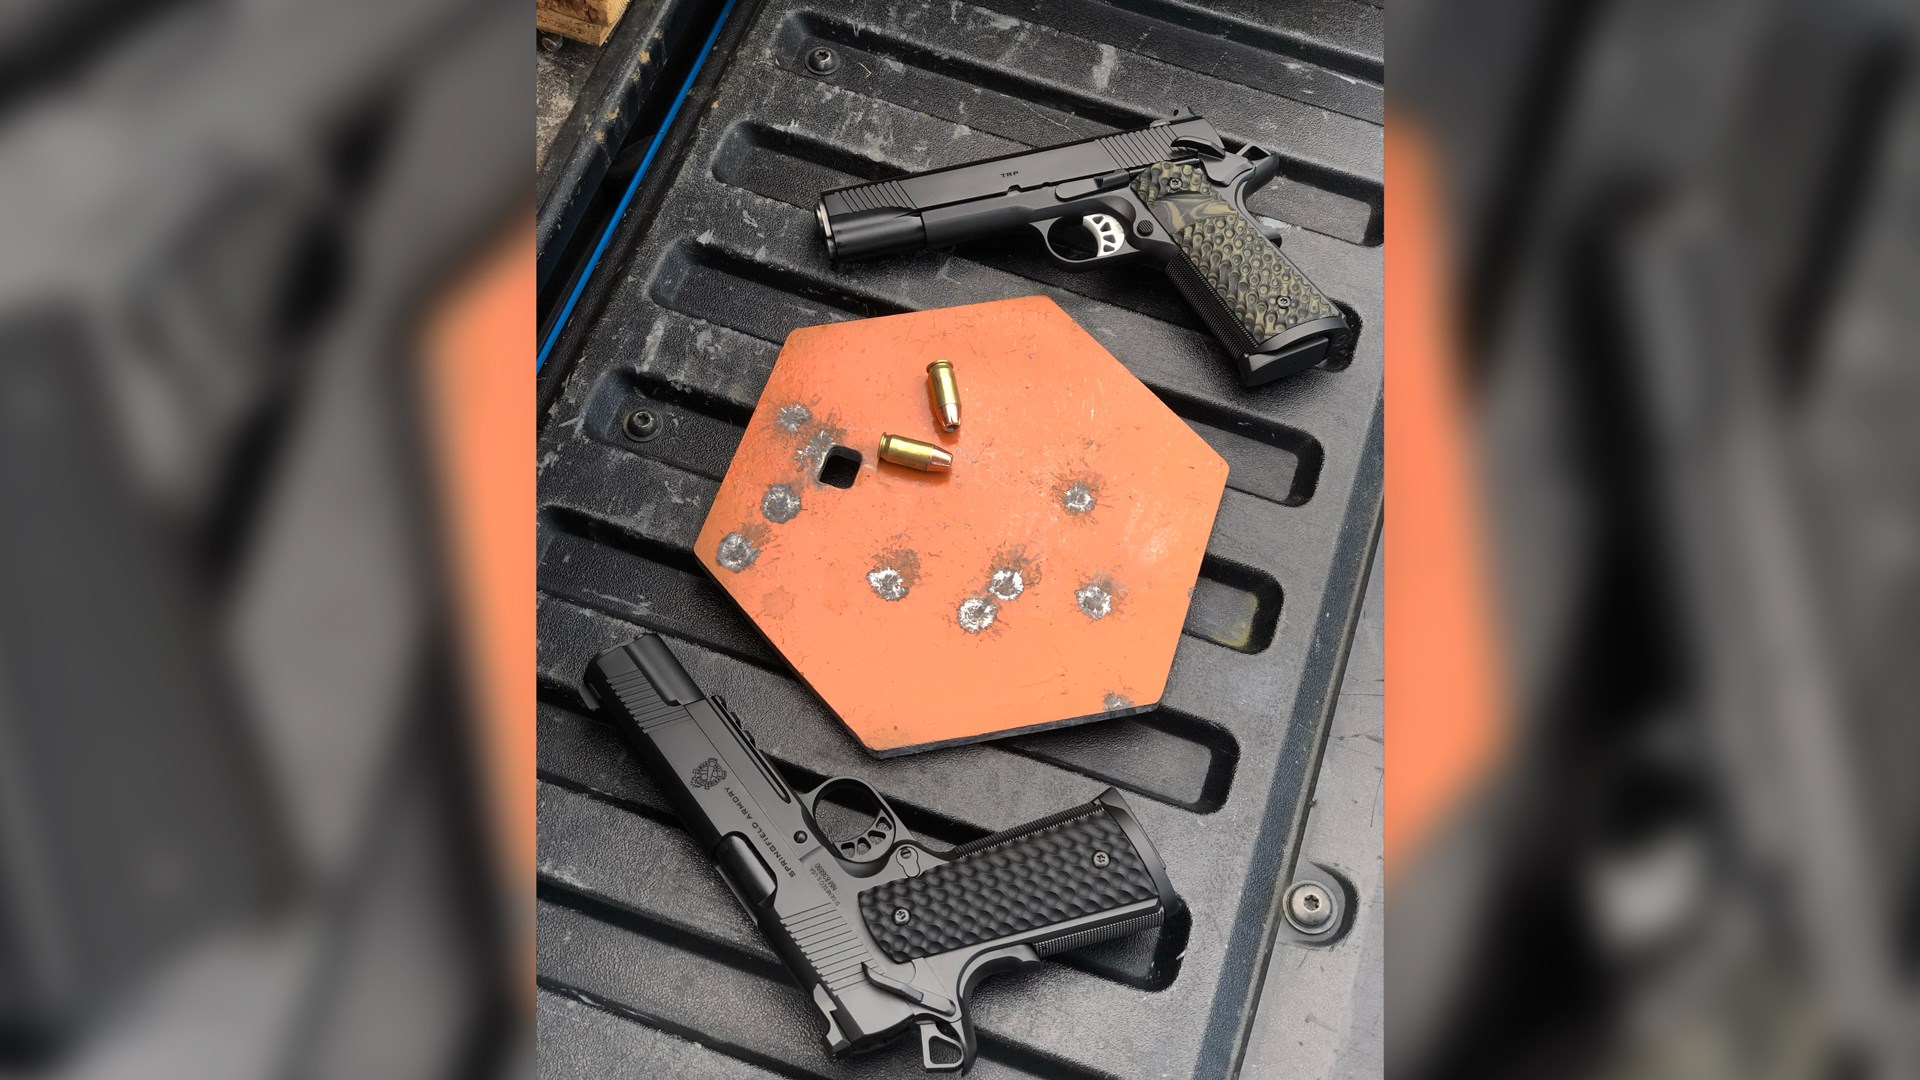 image overlay showing two springfield armory trp 1911 pistols with orange gong target with ammunition on truck tailgate